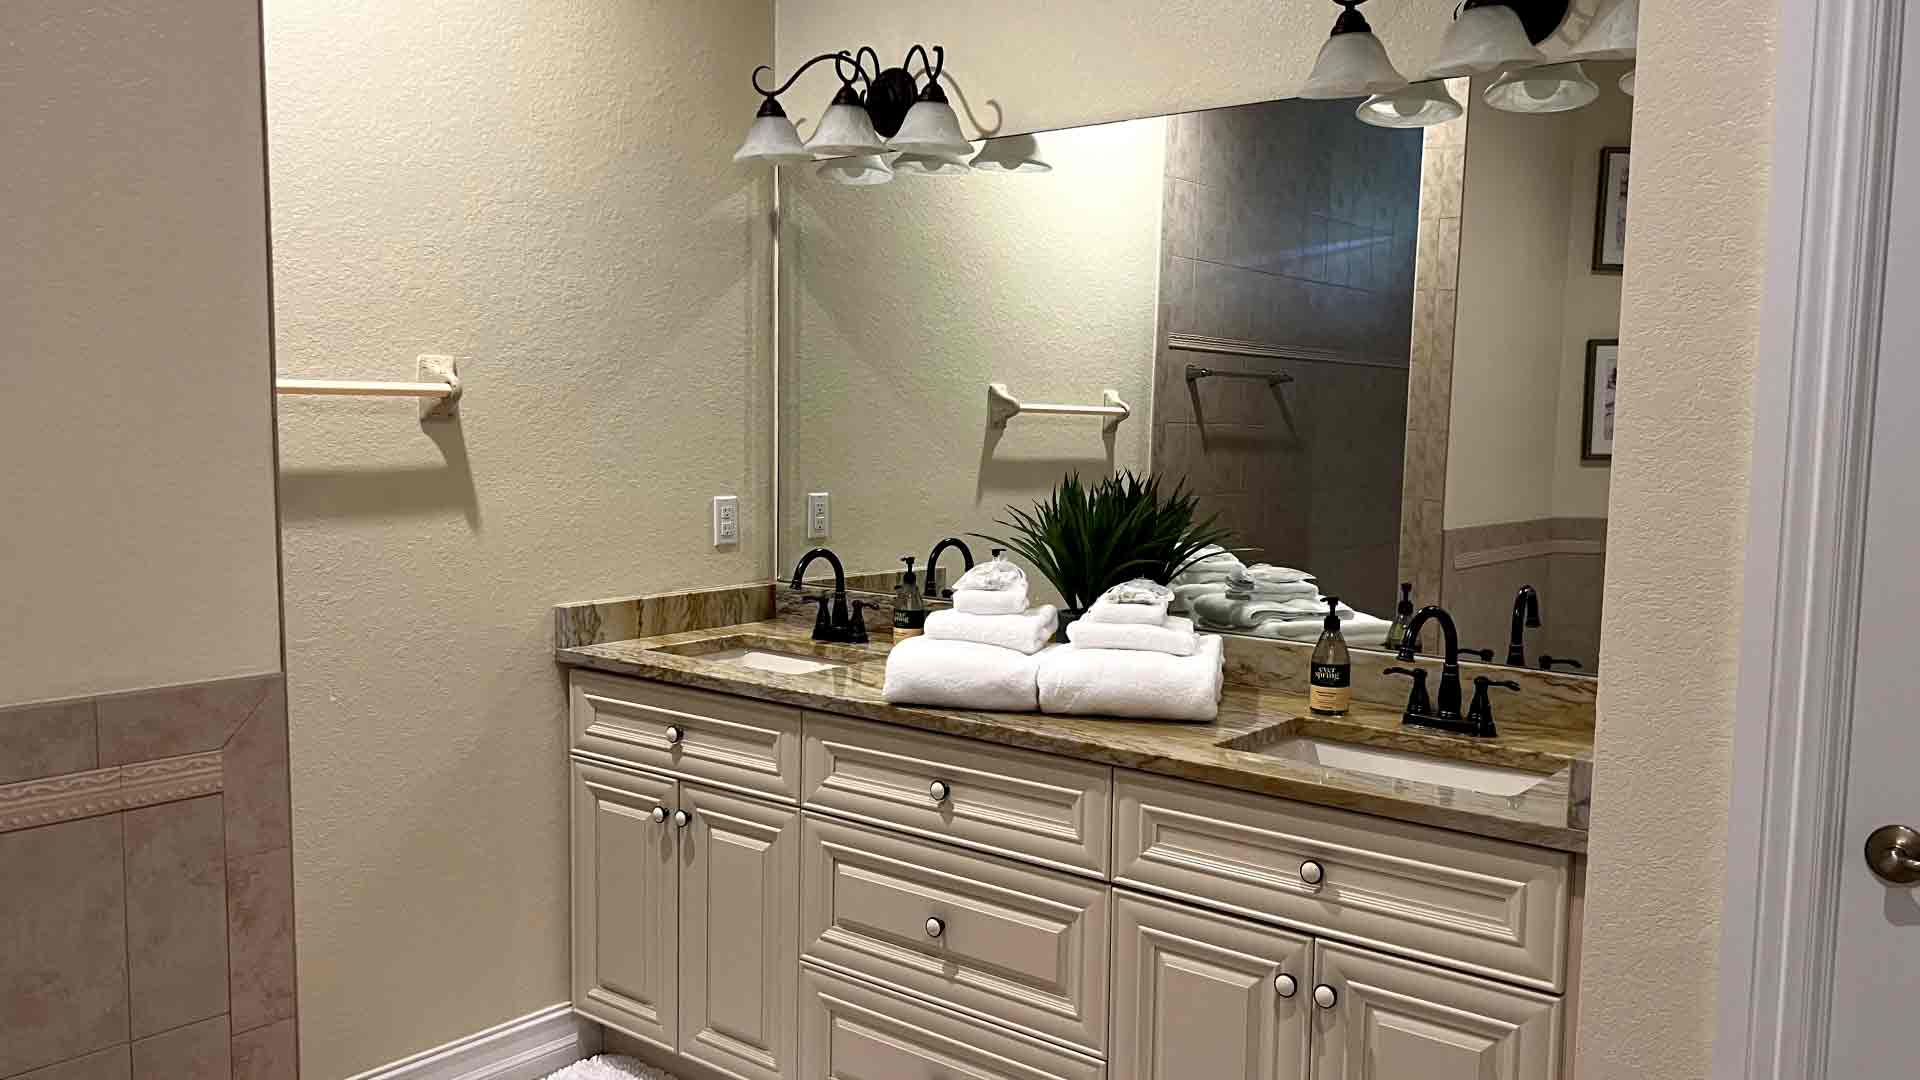 Bathroom - Regular cleaning in Cape Coral by Goldmillio - May 3